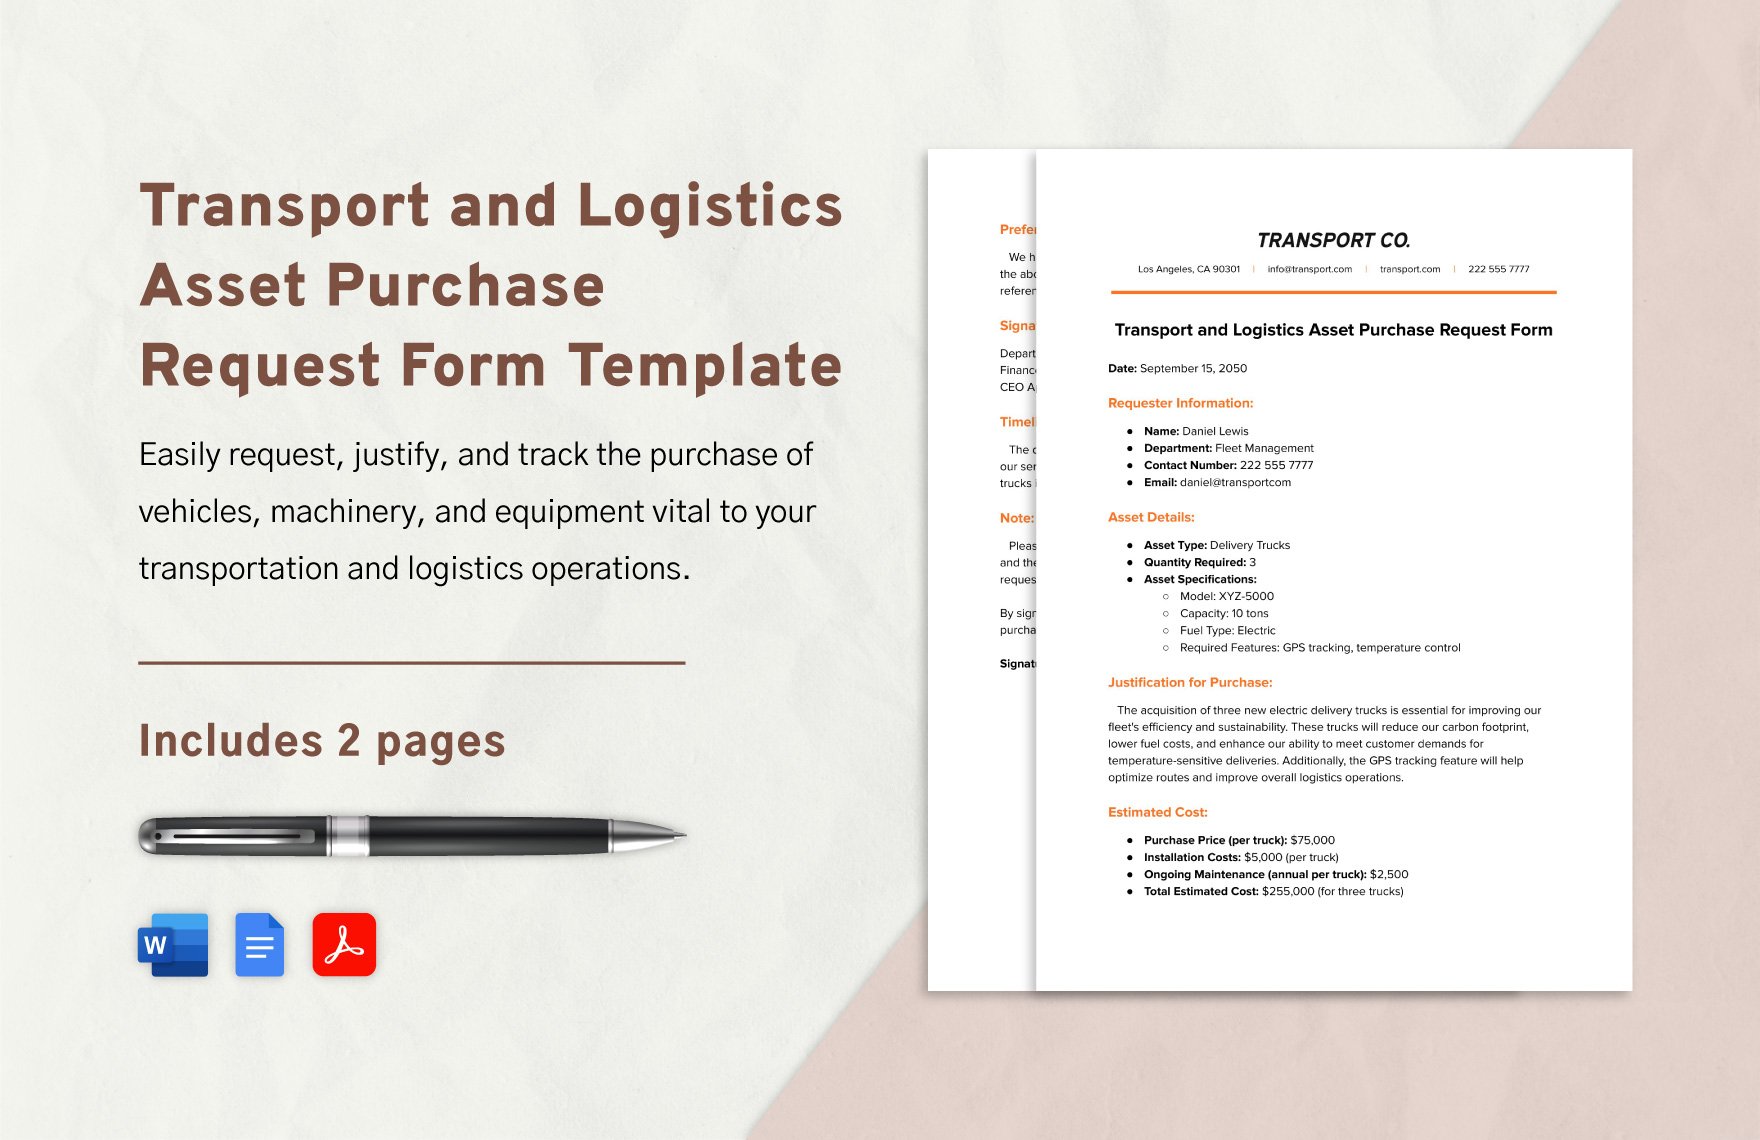 Transport and Logistics Asset Purchase Request Form Template in Word, Google Docs, PDF